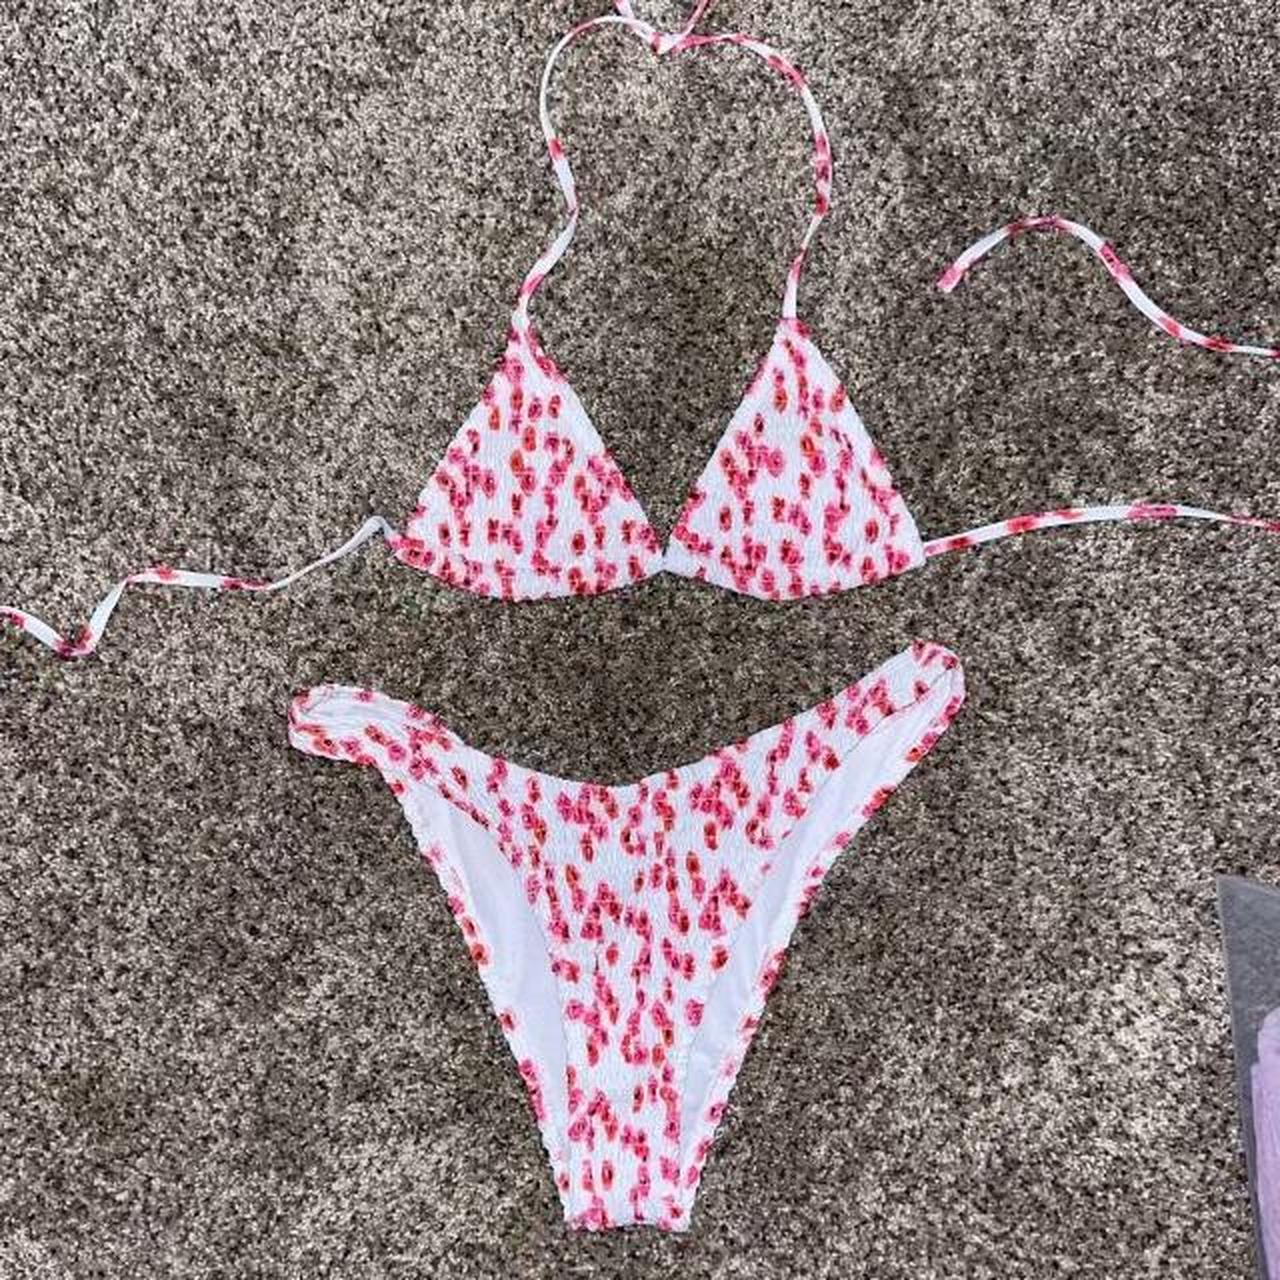 Women's Pink and Red Bikinis-and-tankini-sets | Depop